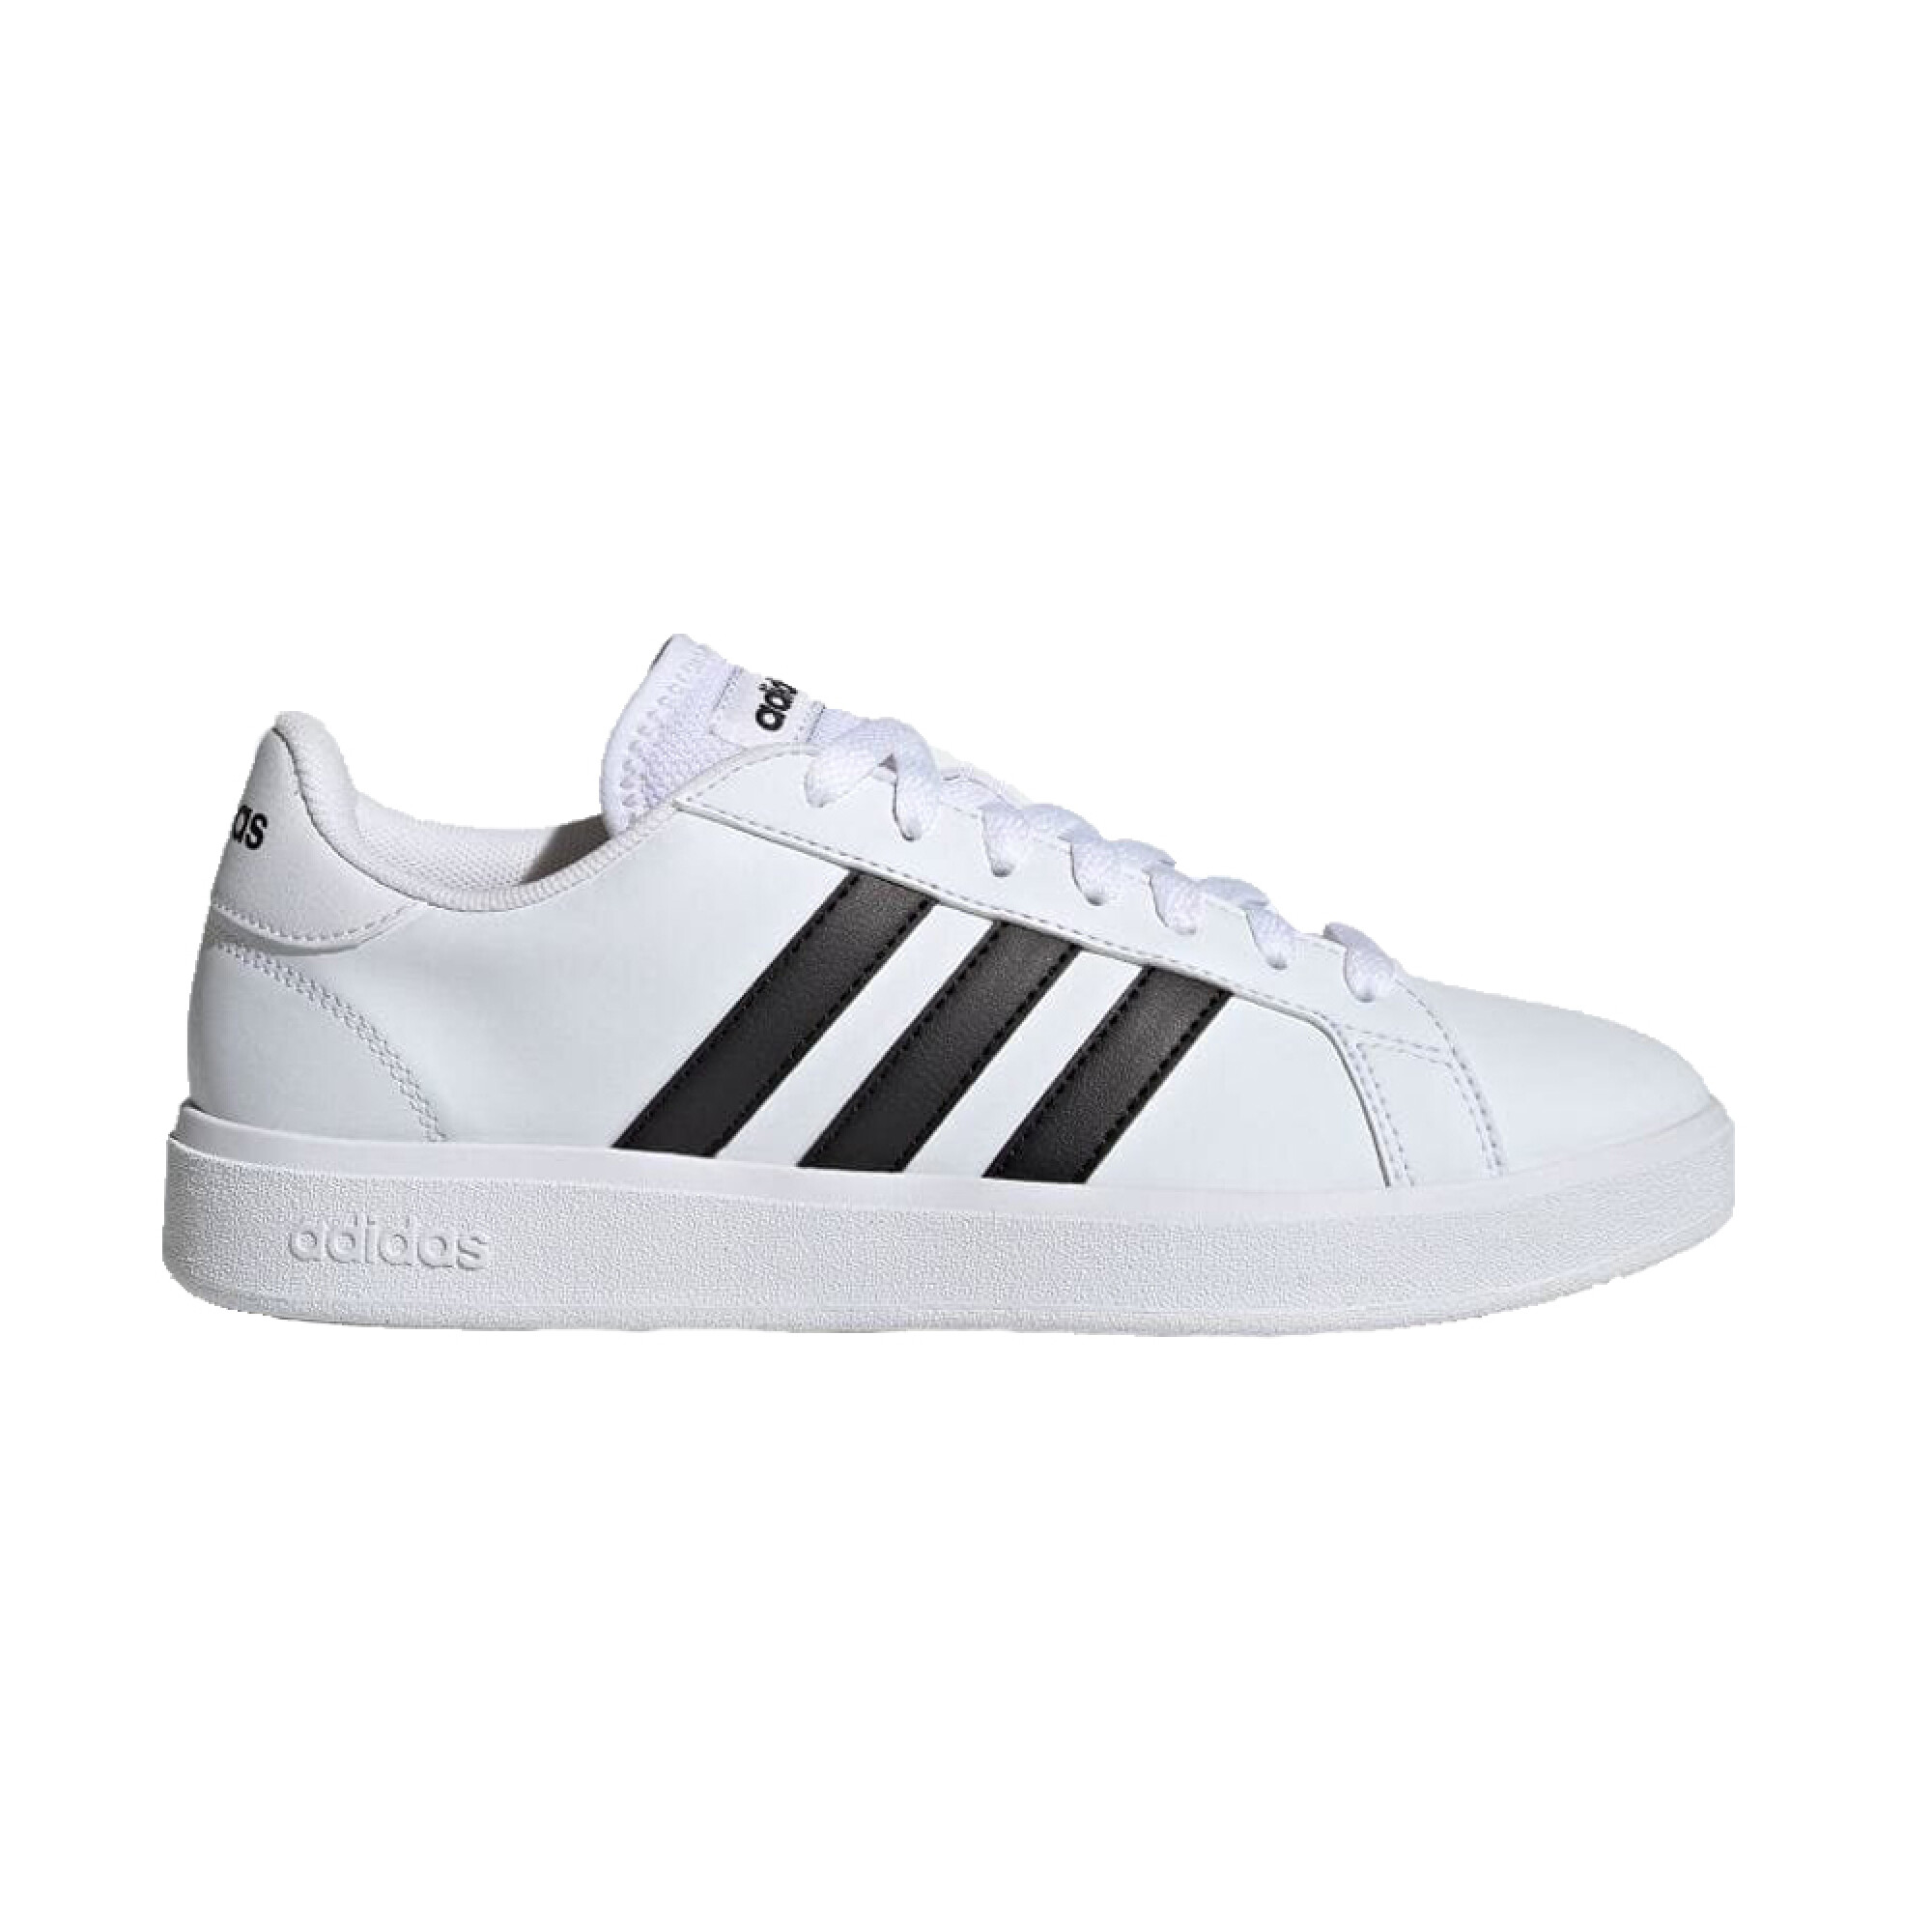 Cambiable Dormitorio bisonte adidas GRAND COURT BASE 2.0 - Black White — Global Sports